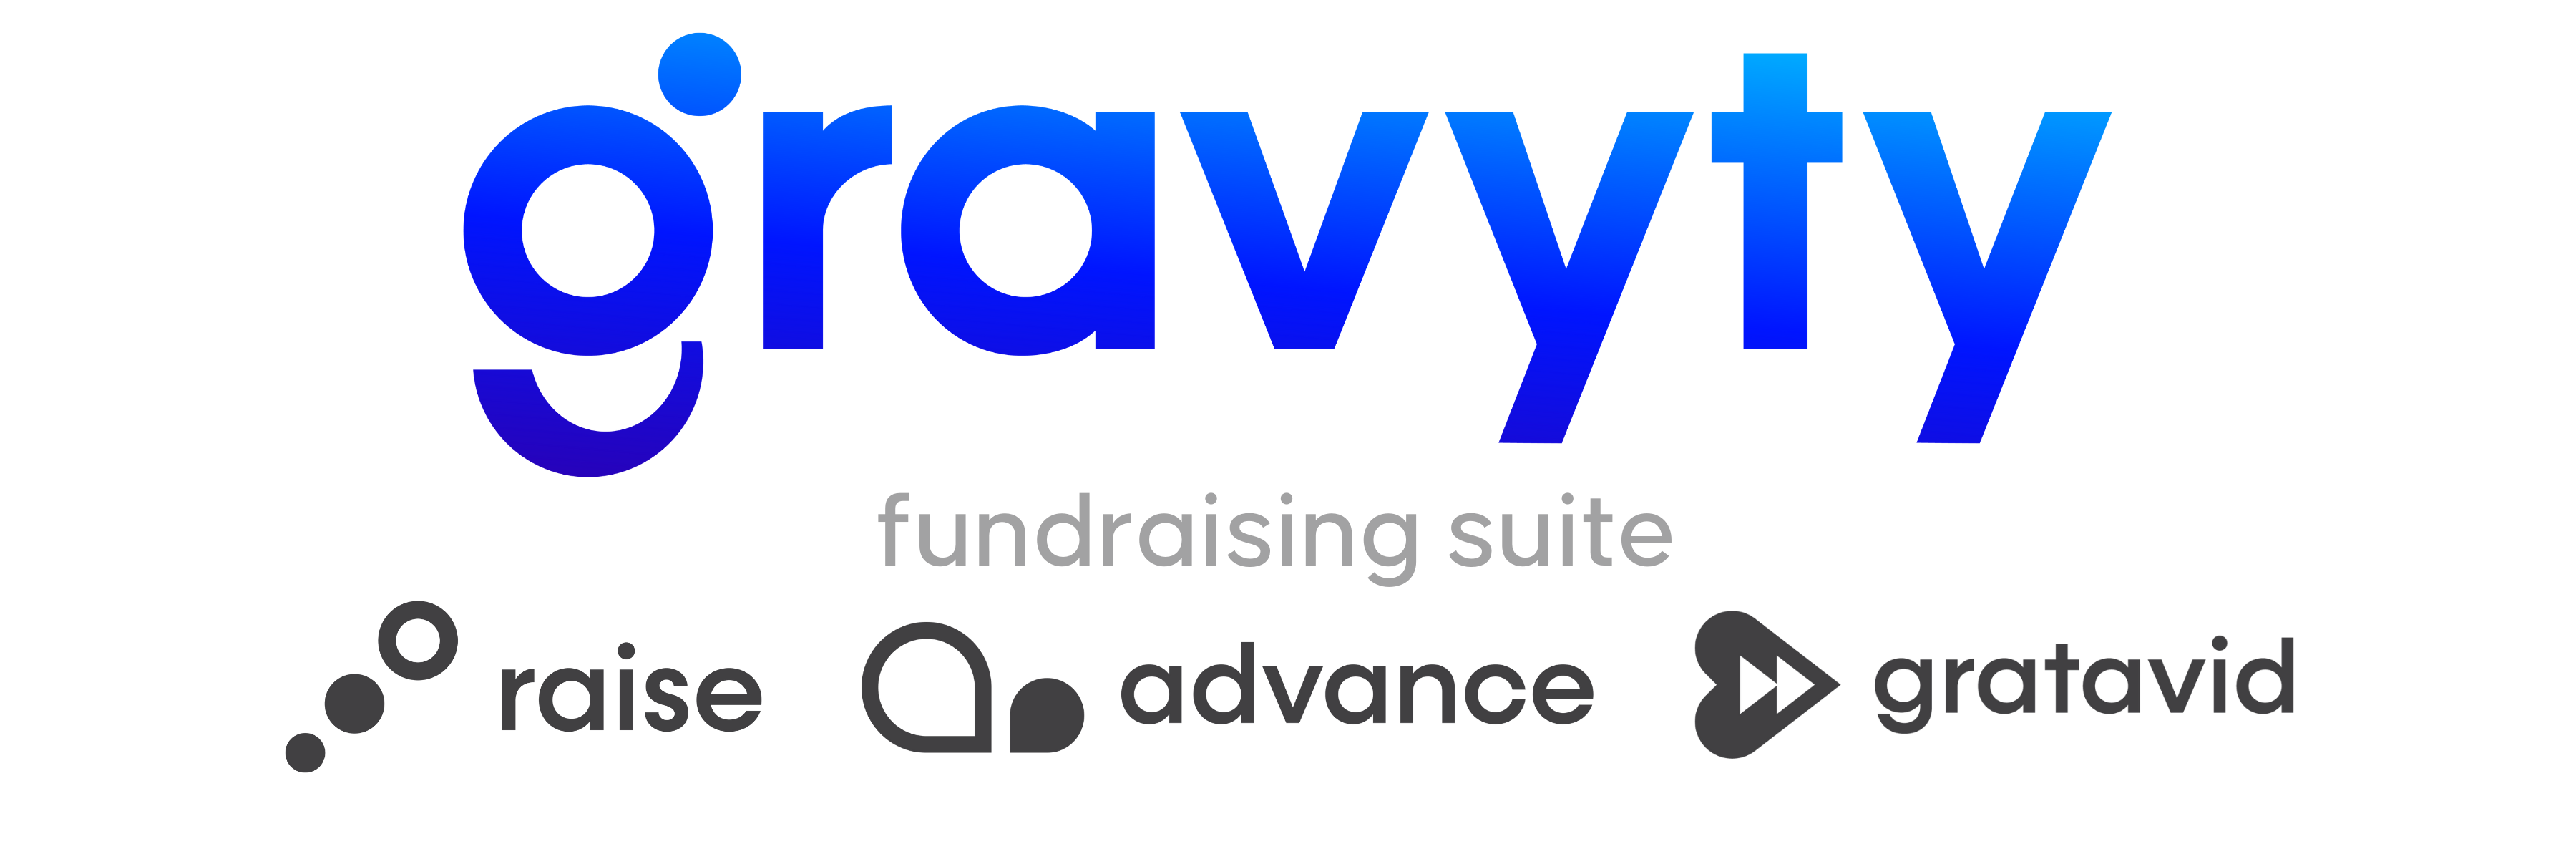 Gravyty fundraising suite 